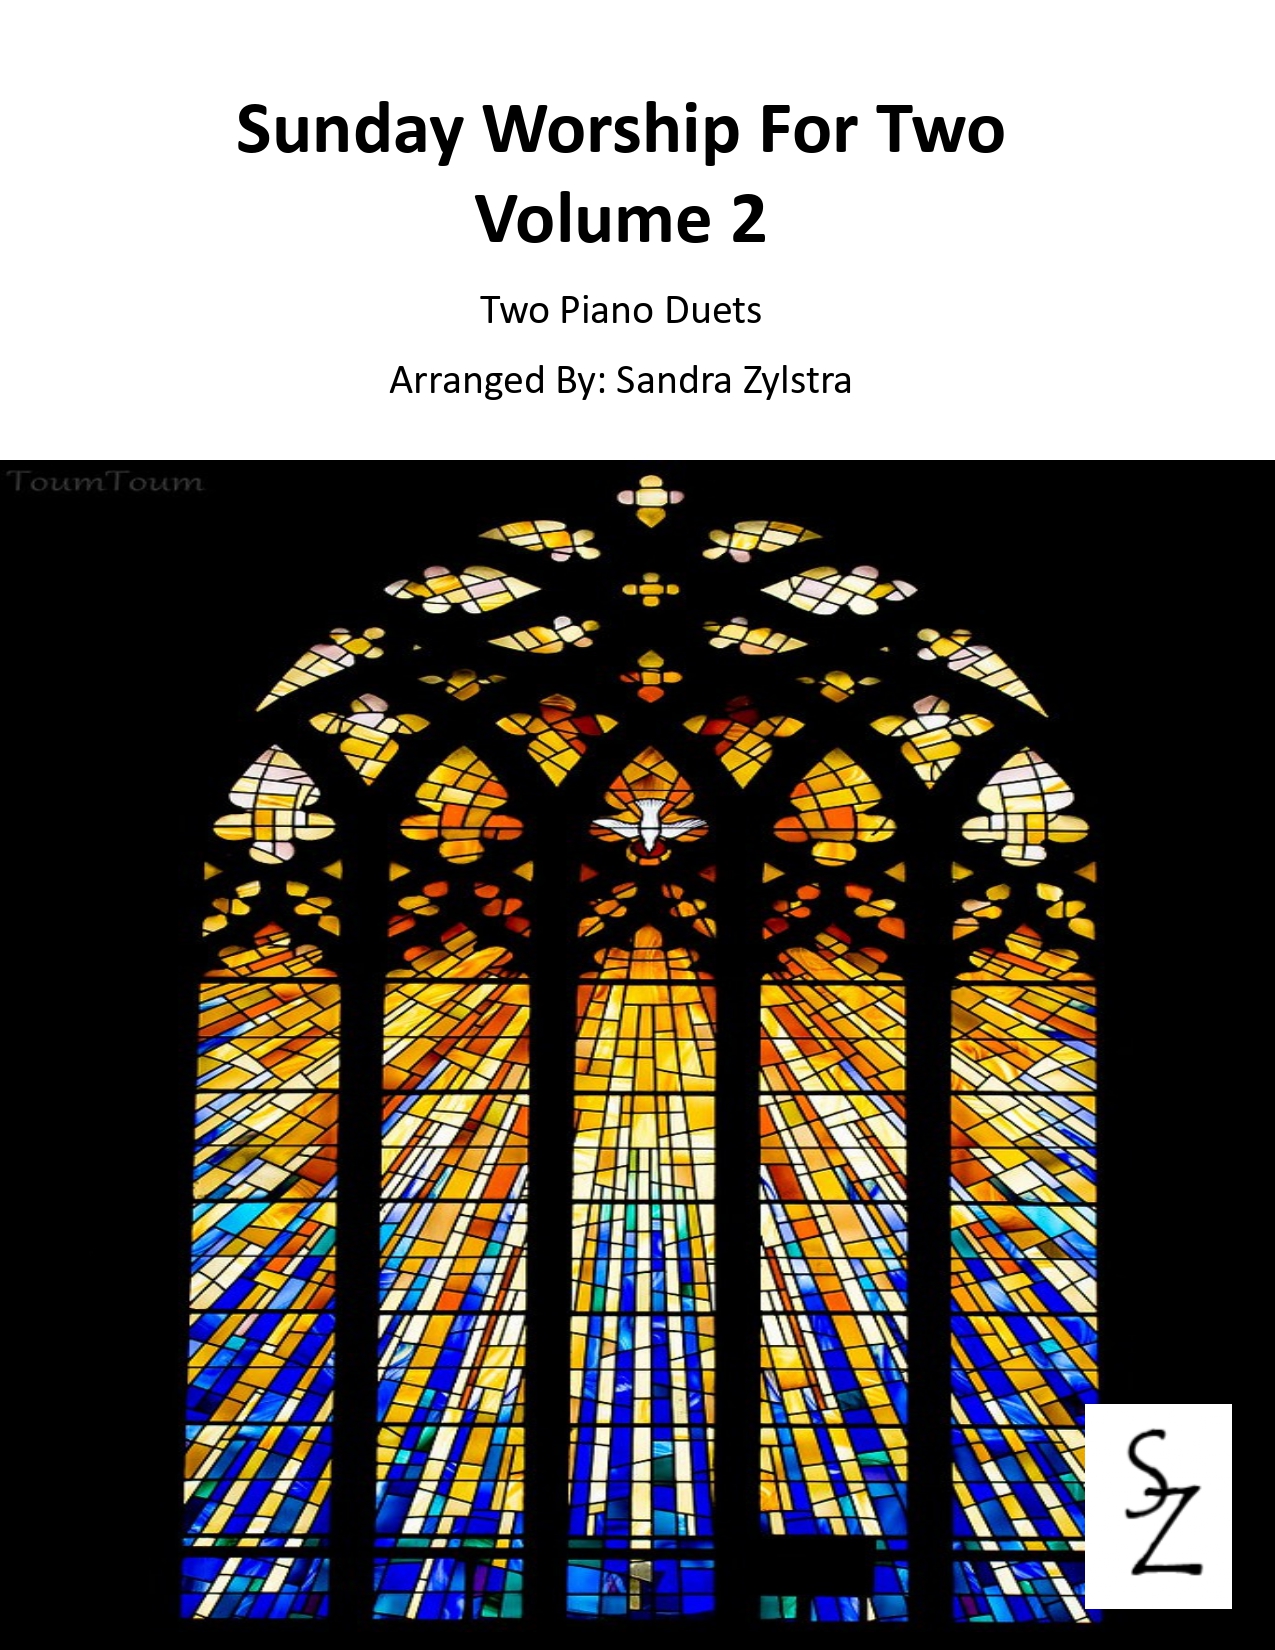 Sunday Worship For Two Vol. 2 2 piano duets cover page 00011